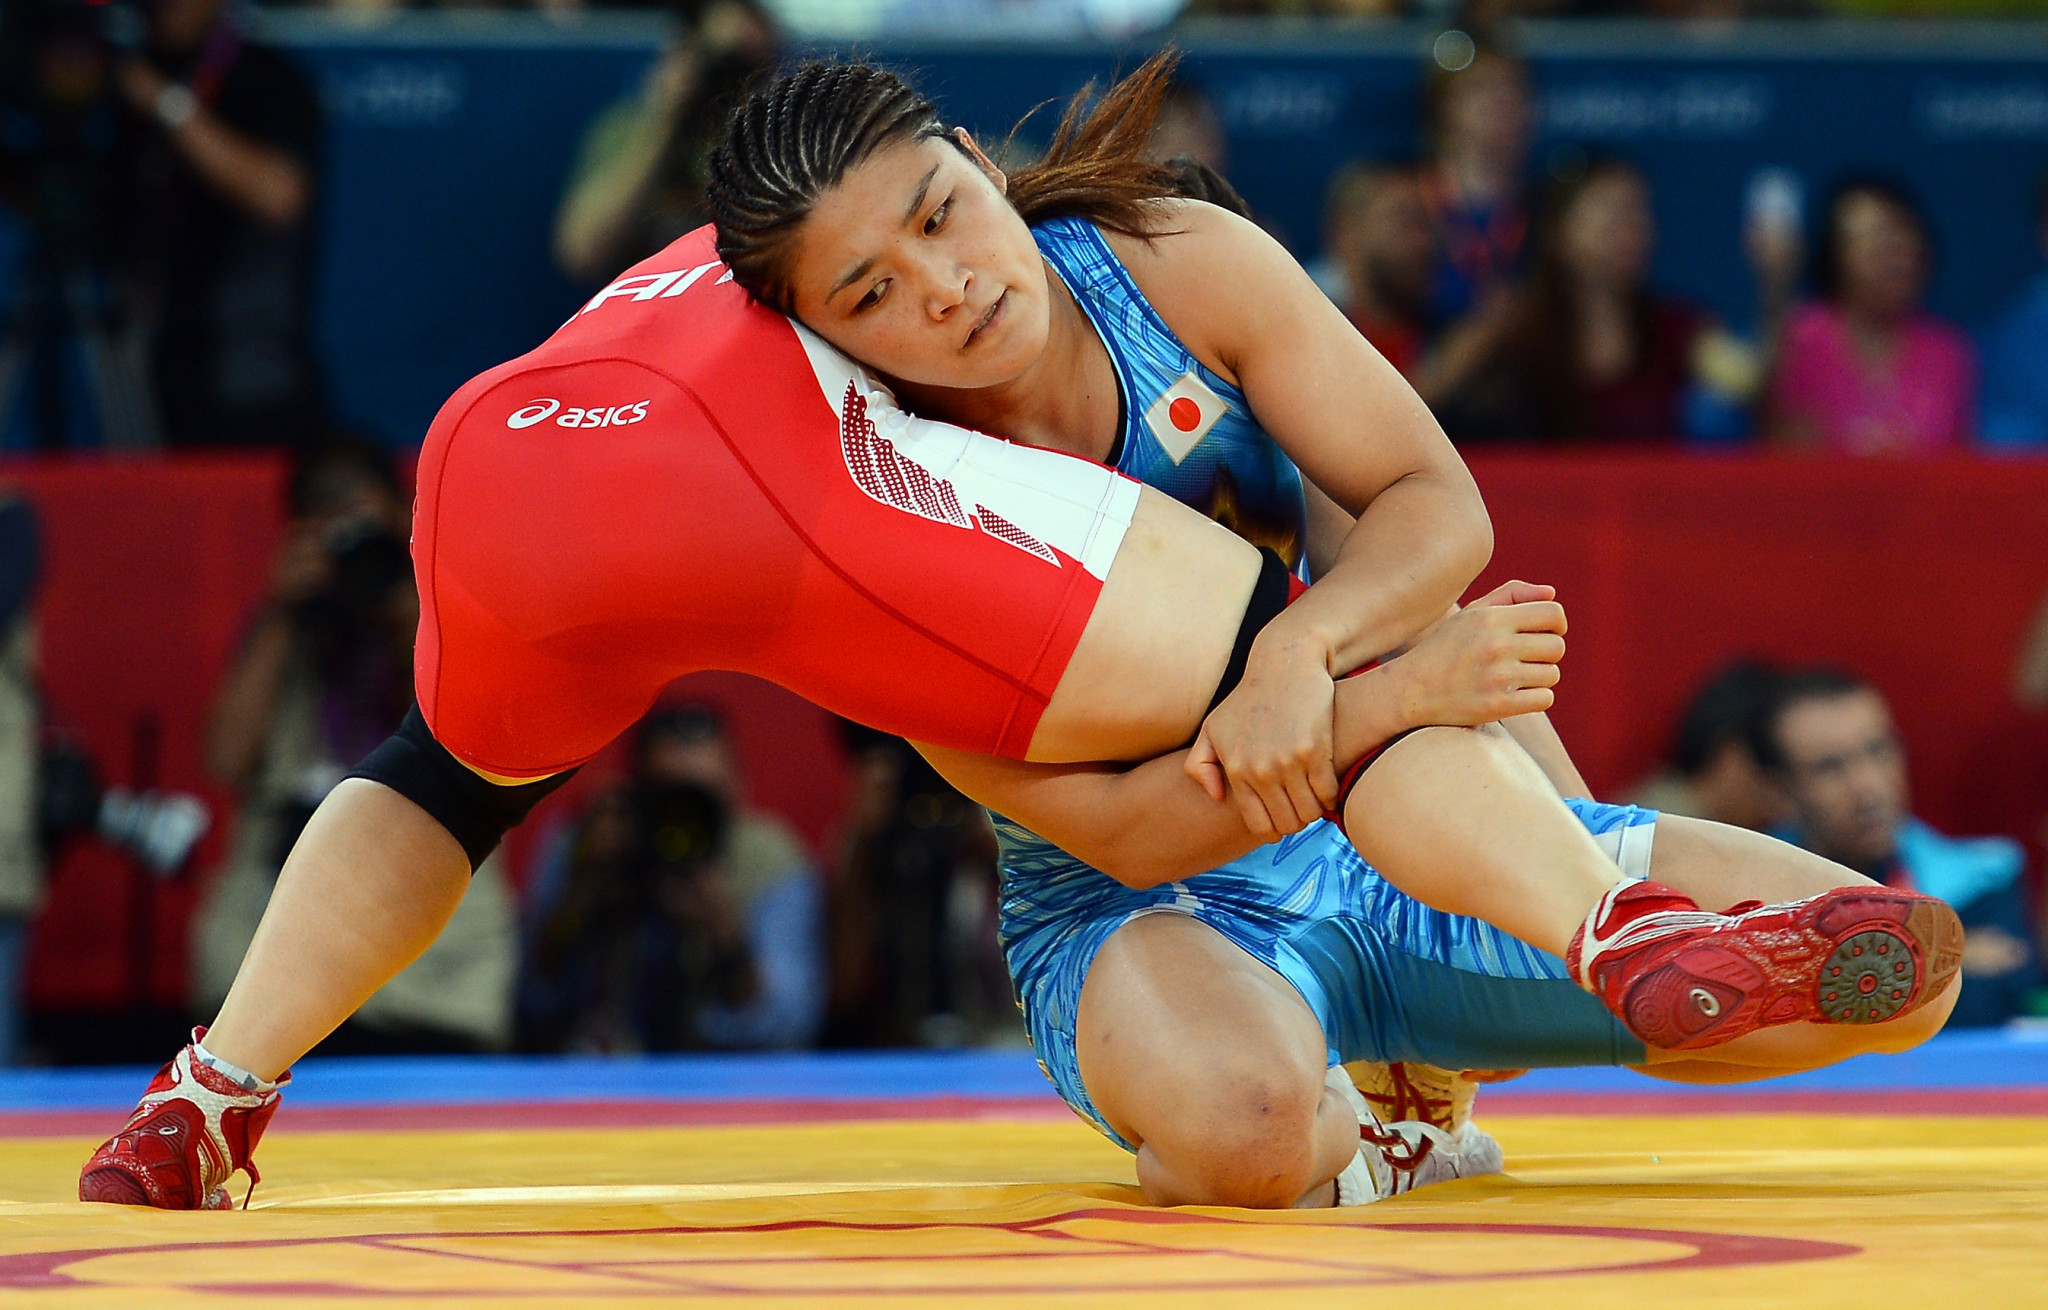 Japan eyes Paris 2024 with appointment of Icho to key wrestling role